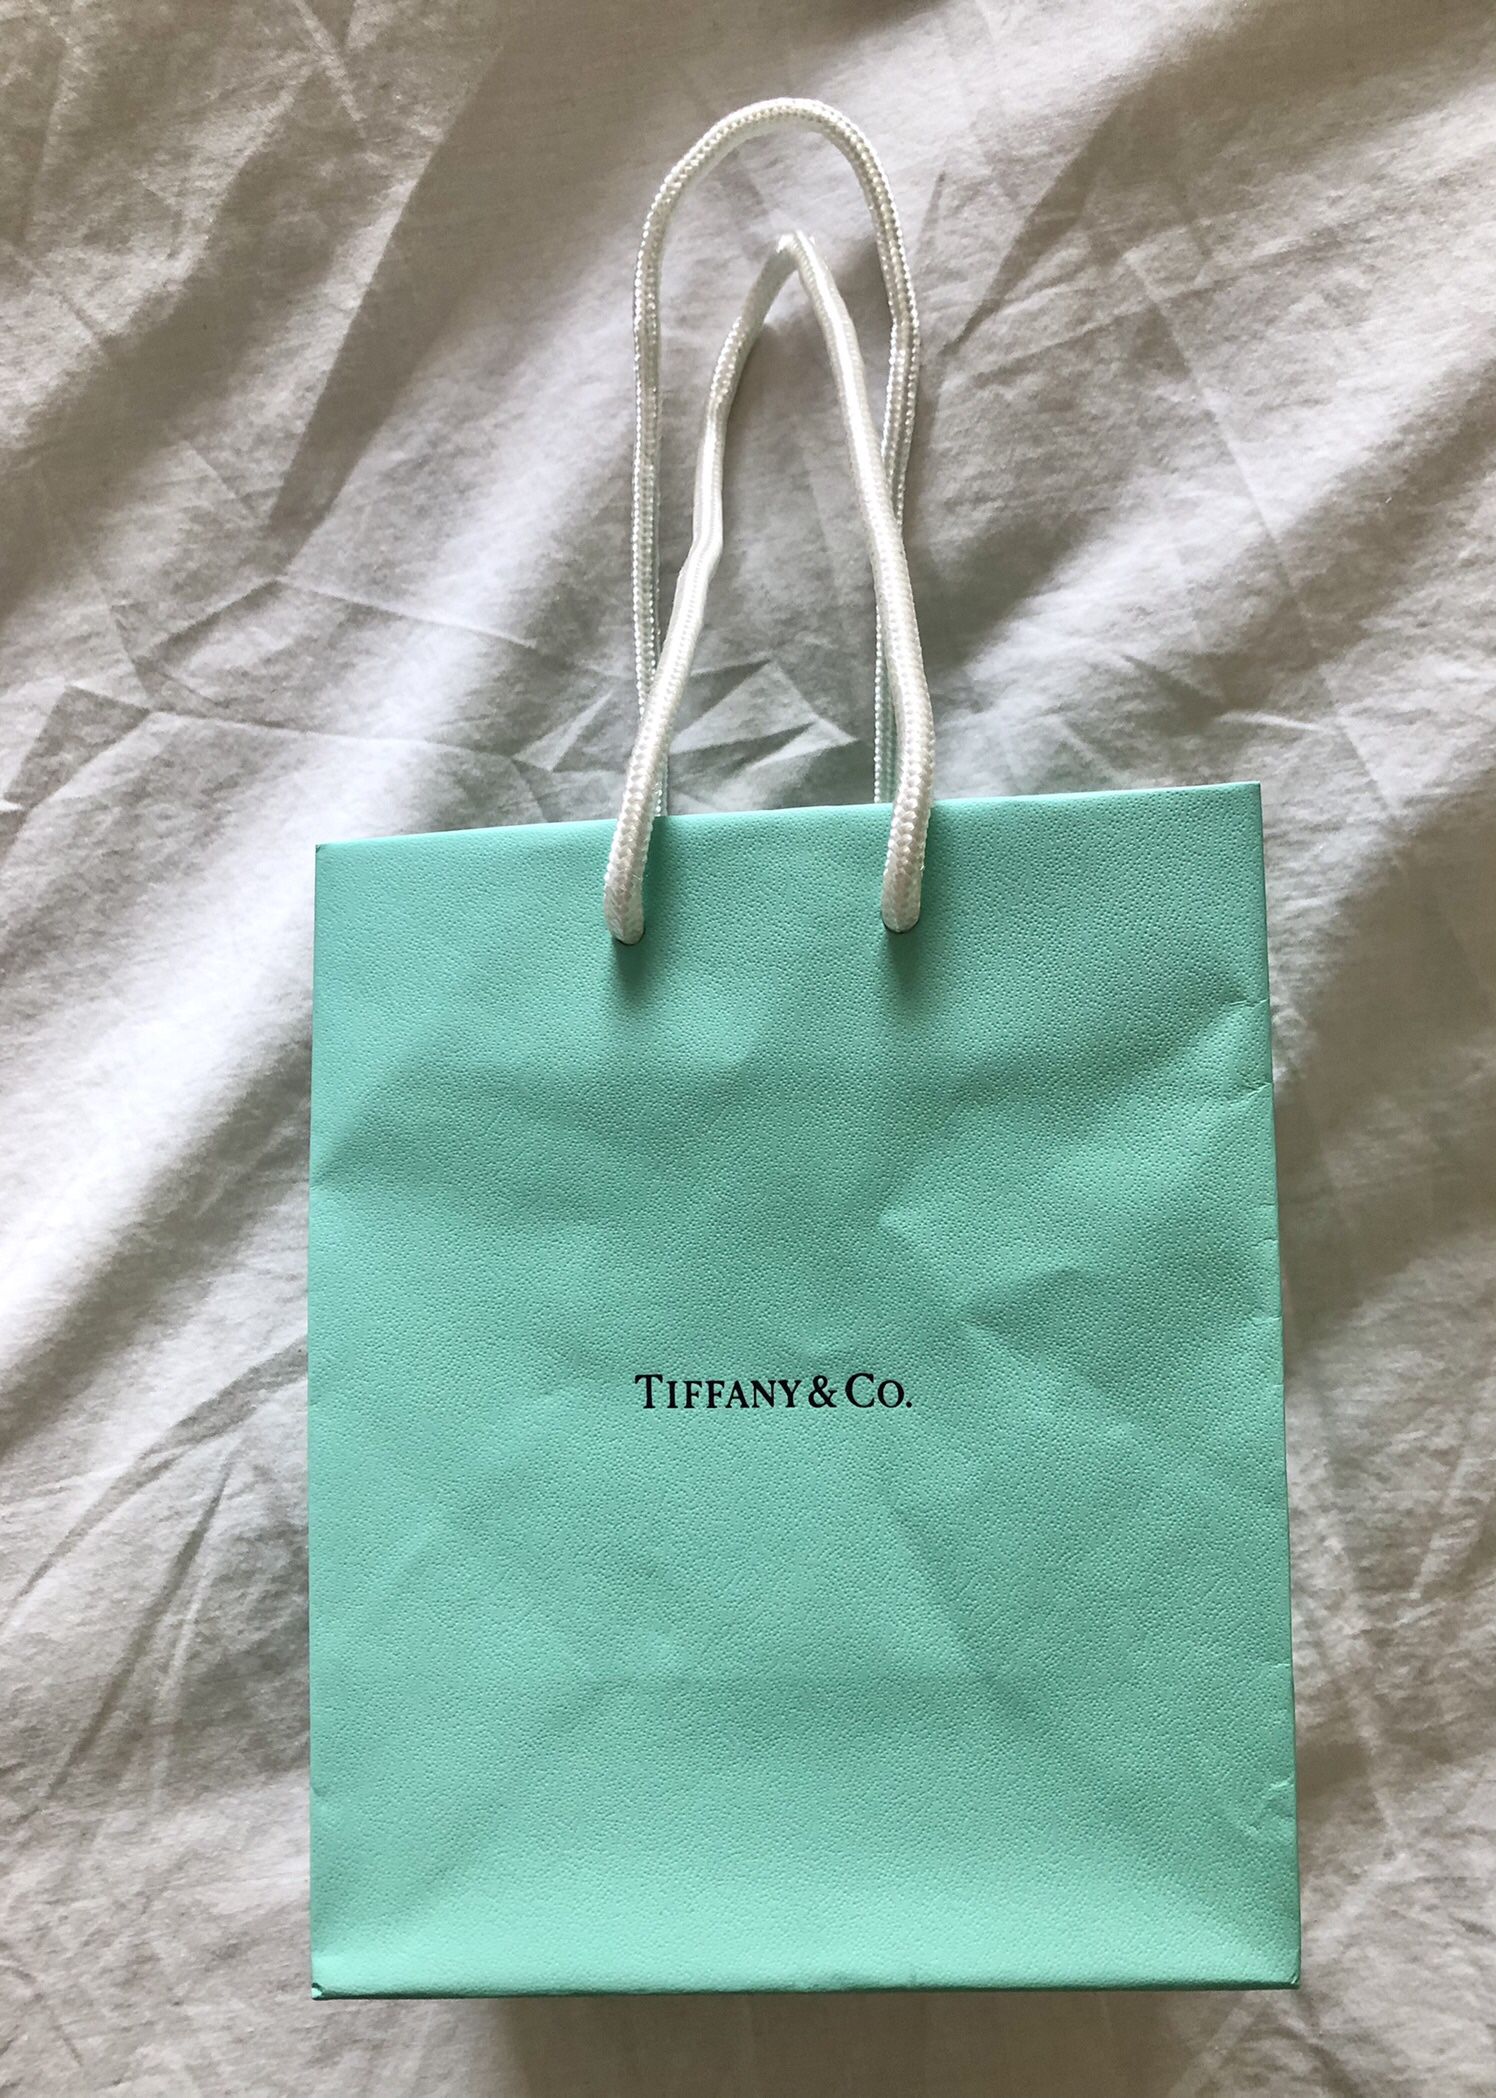 Lot Of Louis Vuitton Gift Bags, Large Prada Gift Boxes, And Tiffany And  Company Gift Box for Sale in Alabaster, AL - OfferUp